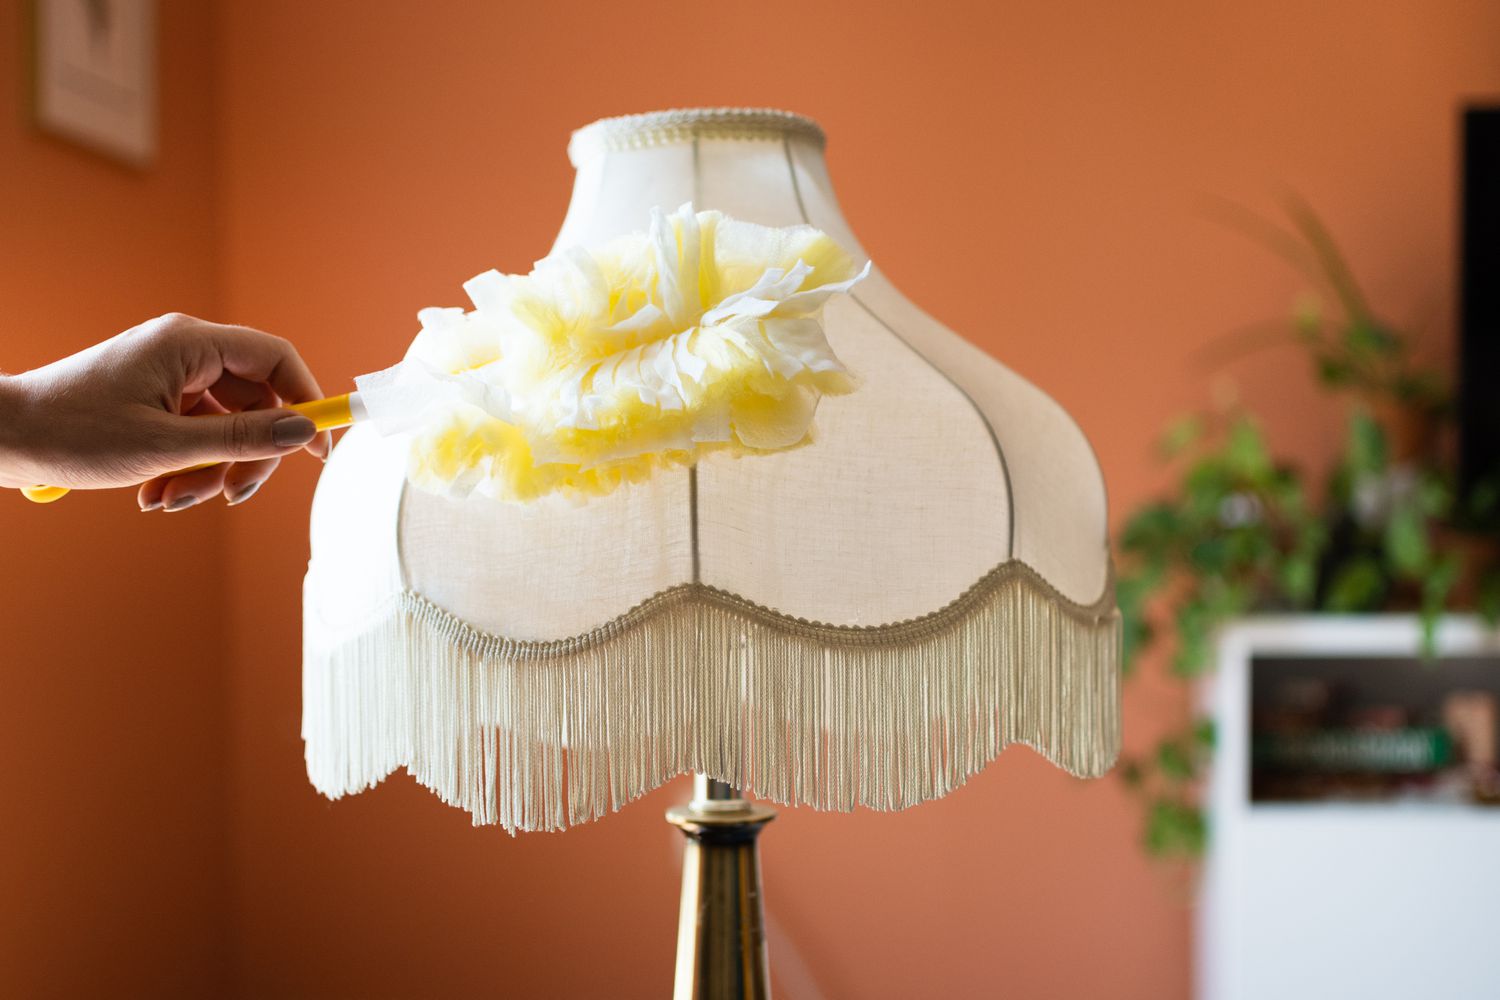 cleaning lamp shades